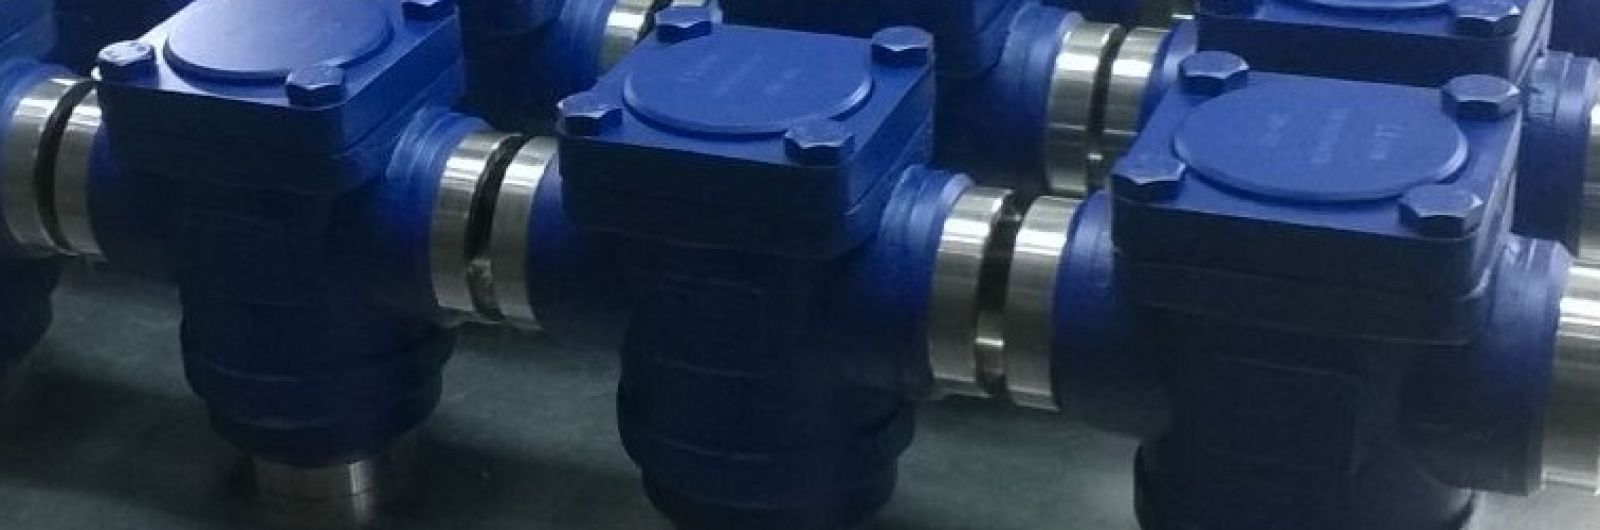 Since 1965 <strong>CAEN</strong> designs and manufactures valves for special applications